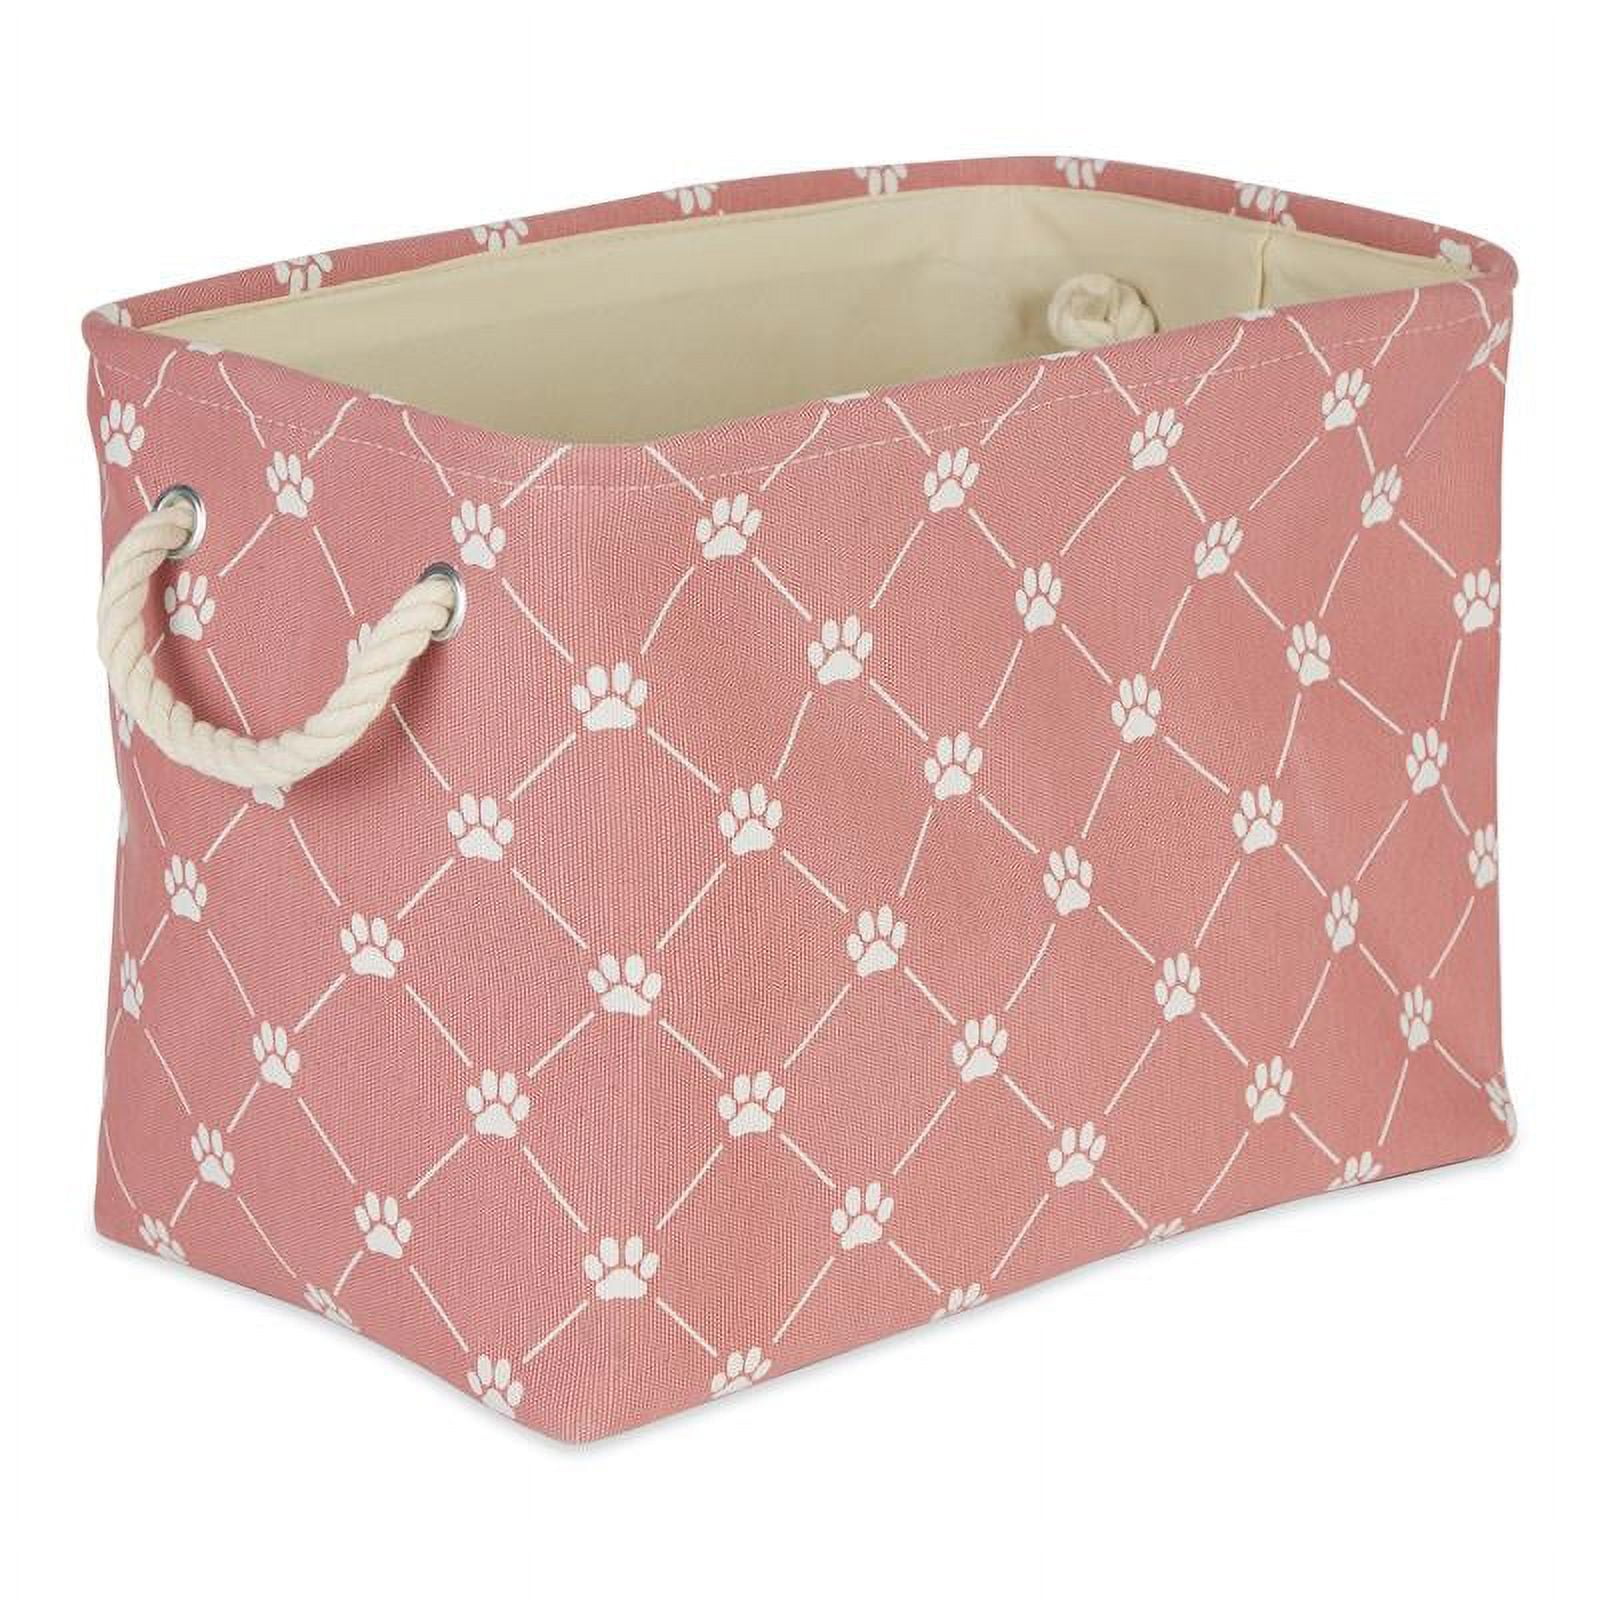 Picture of Design Imports CAMZ14248 Polyester Trellis Paw Rectangle Pet Bin, Rose